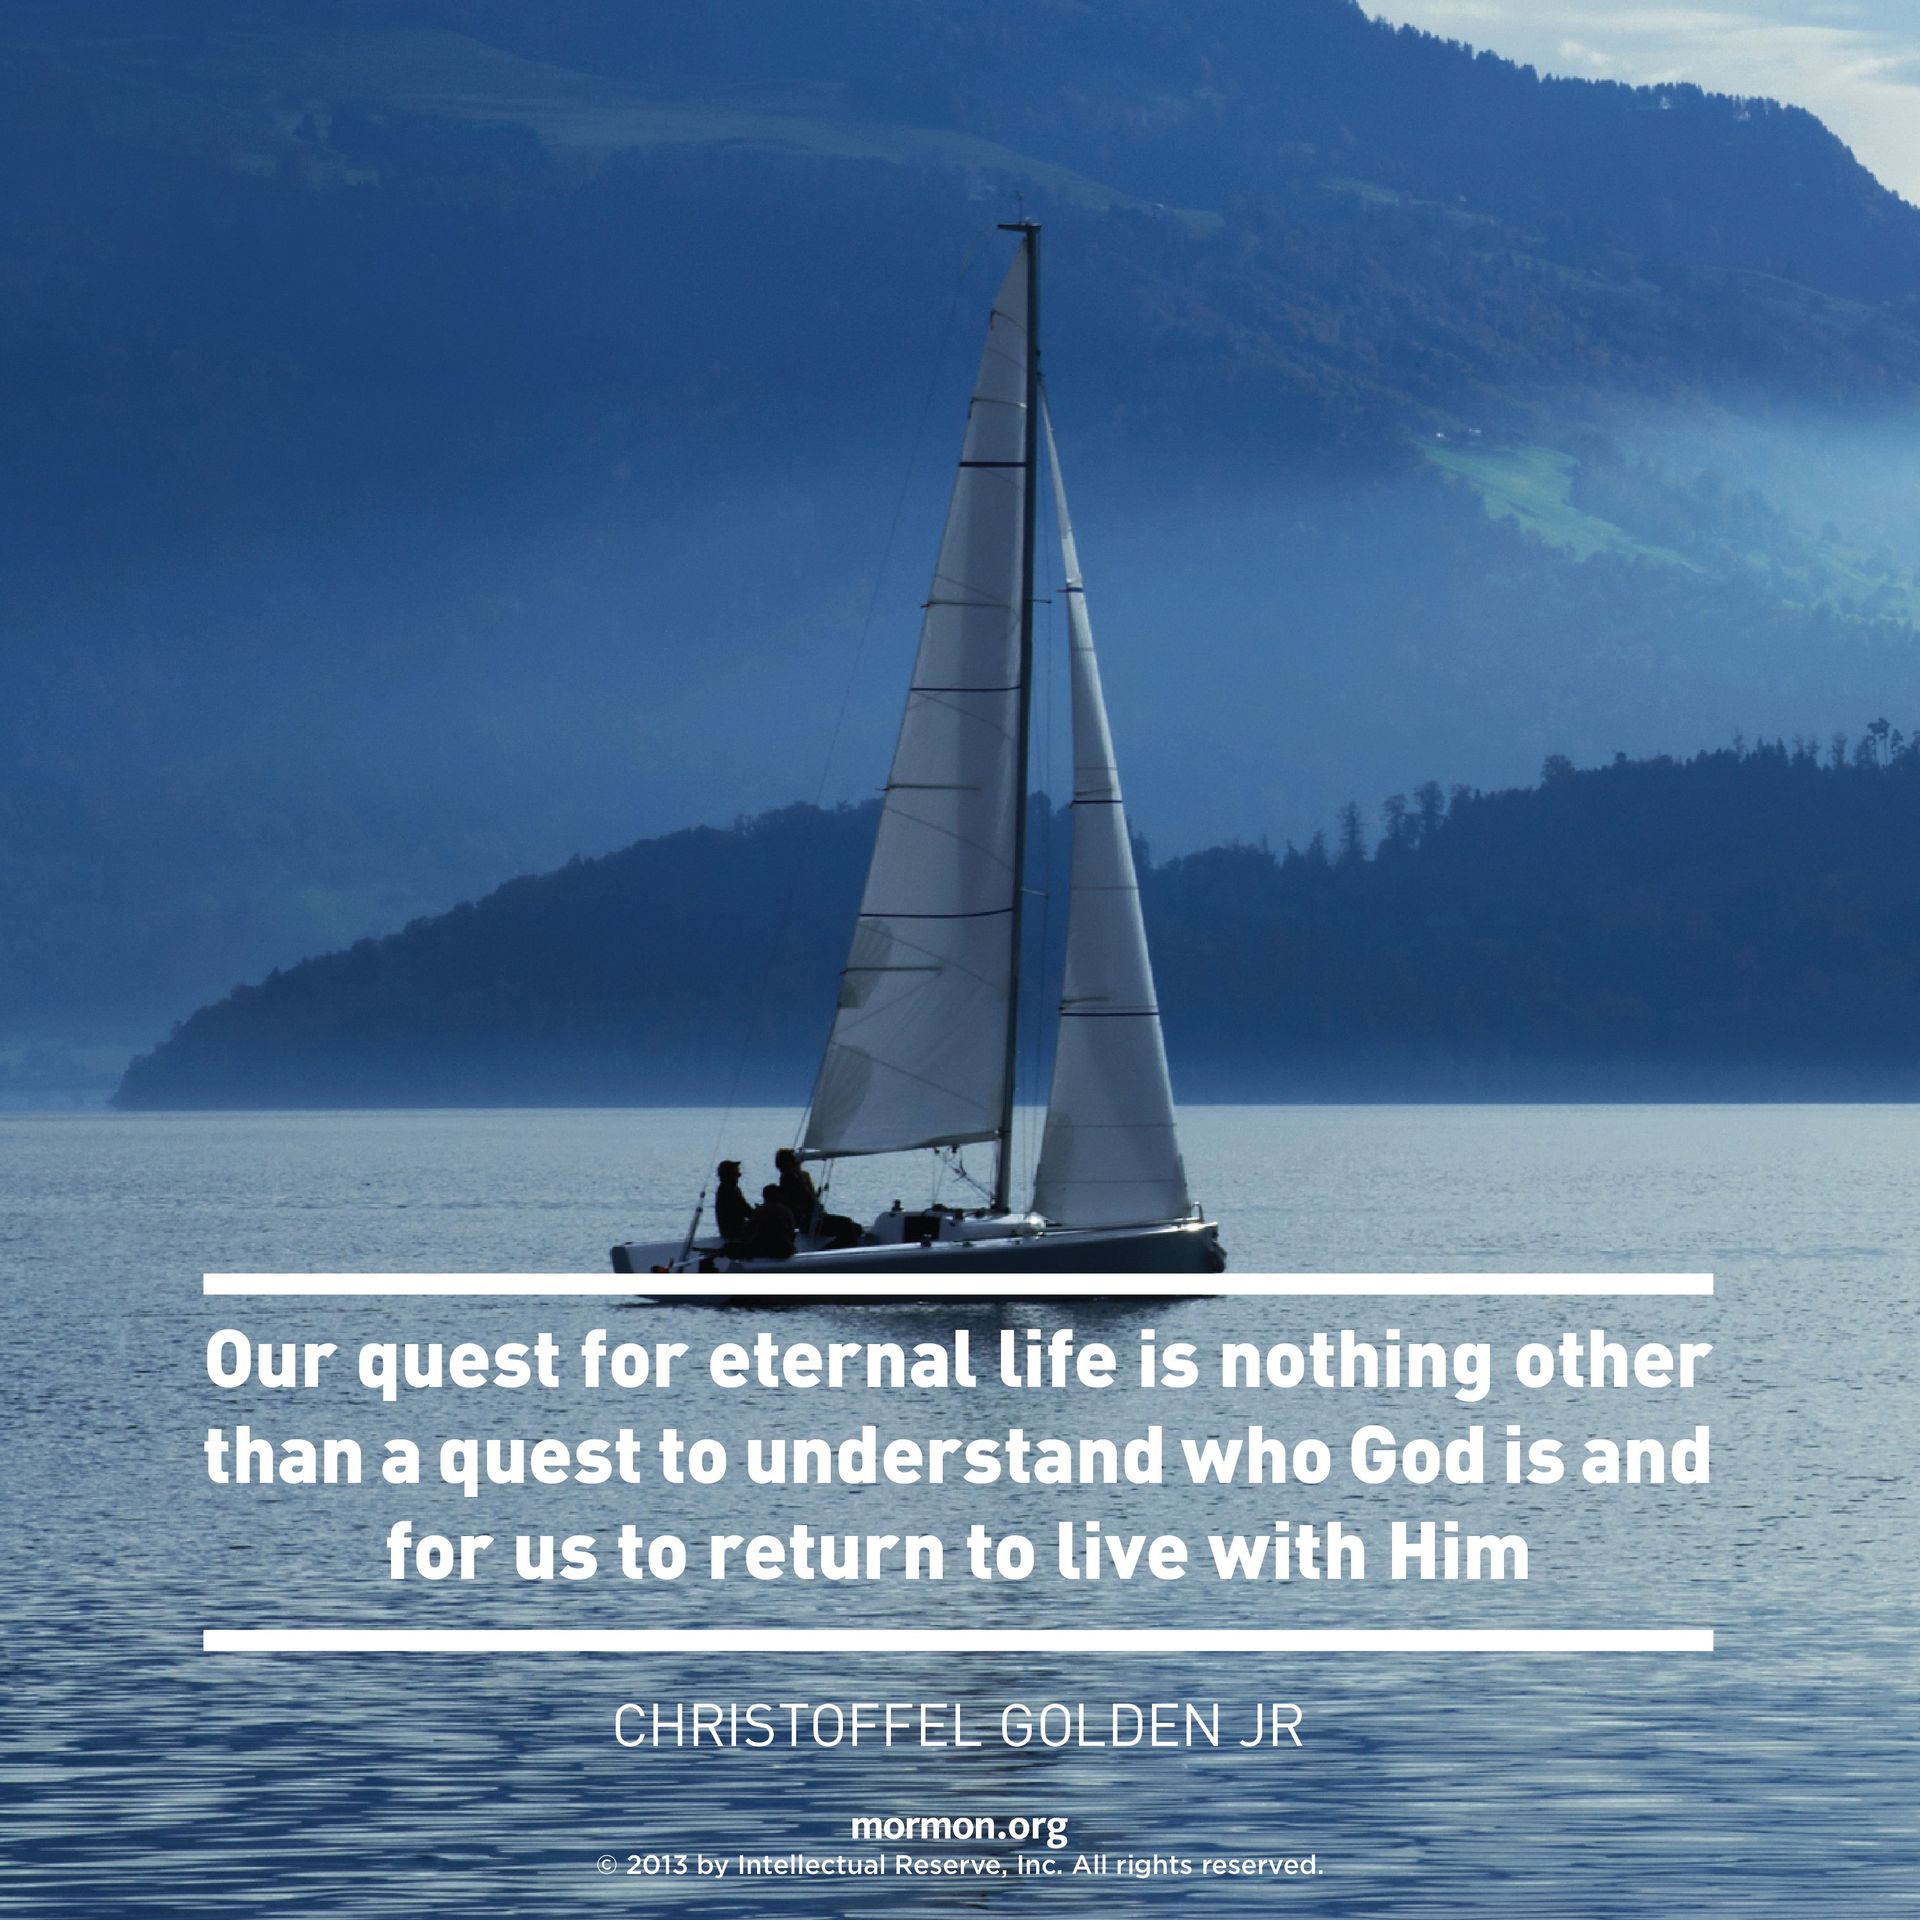 “Our quest for eternal life is nothing other than a quest to understand who God is and for us to return to live with Him.”—Elder Christoffel Golden, “The Father and the Son”